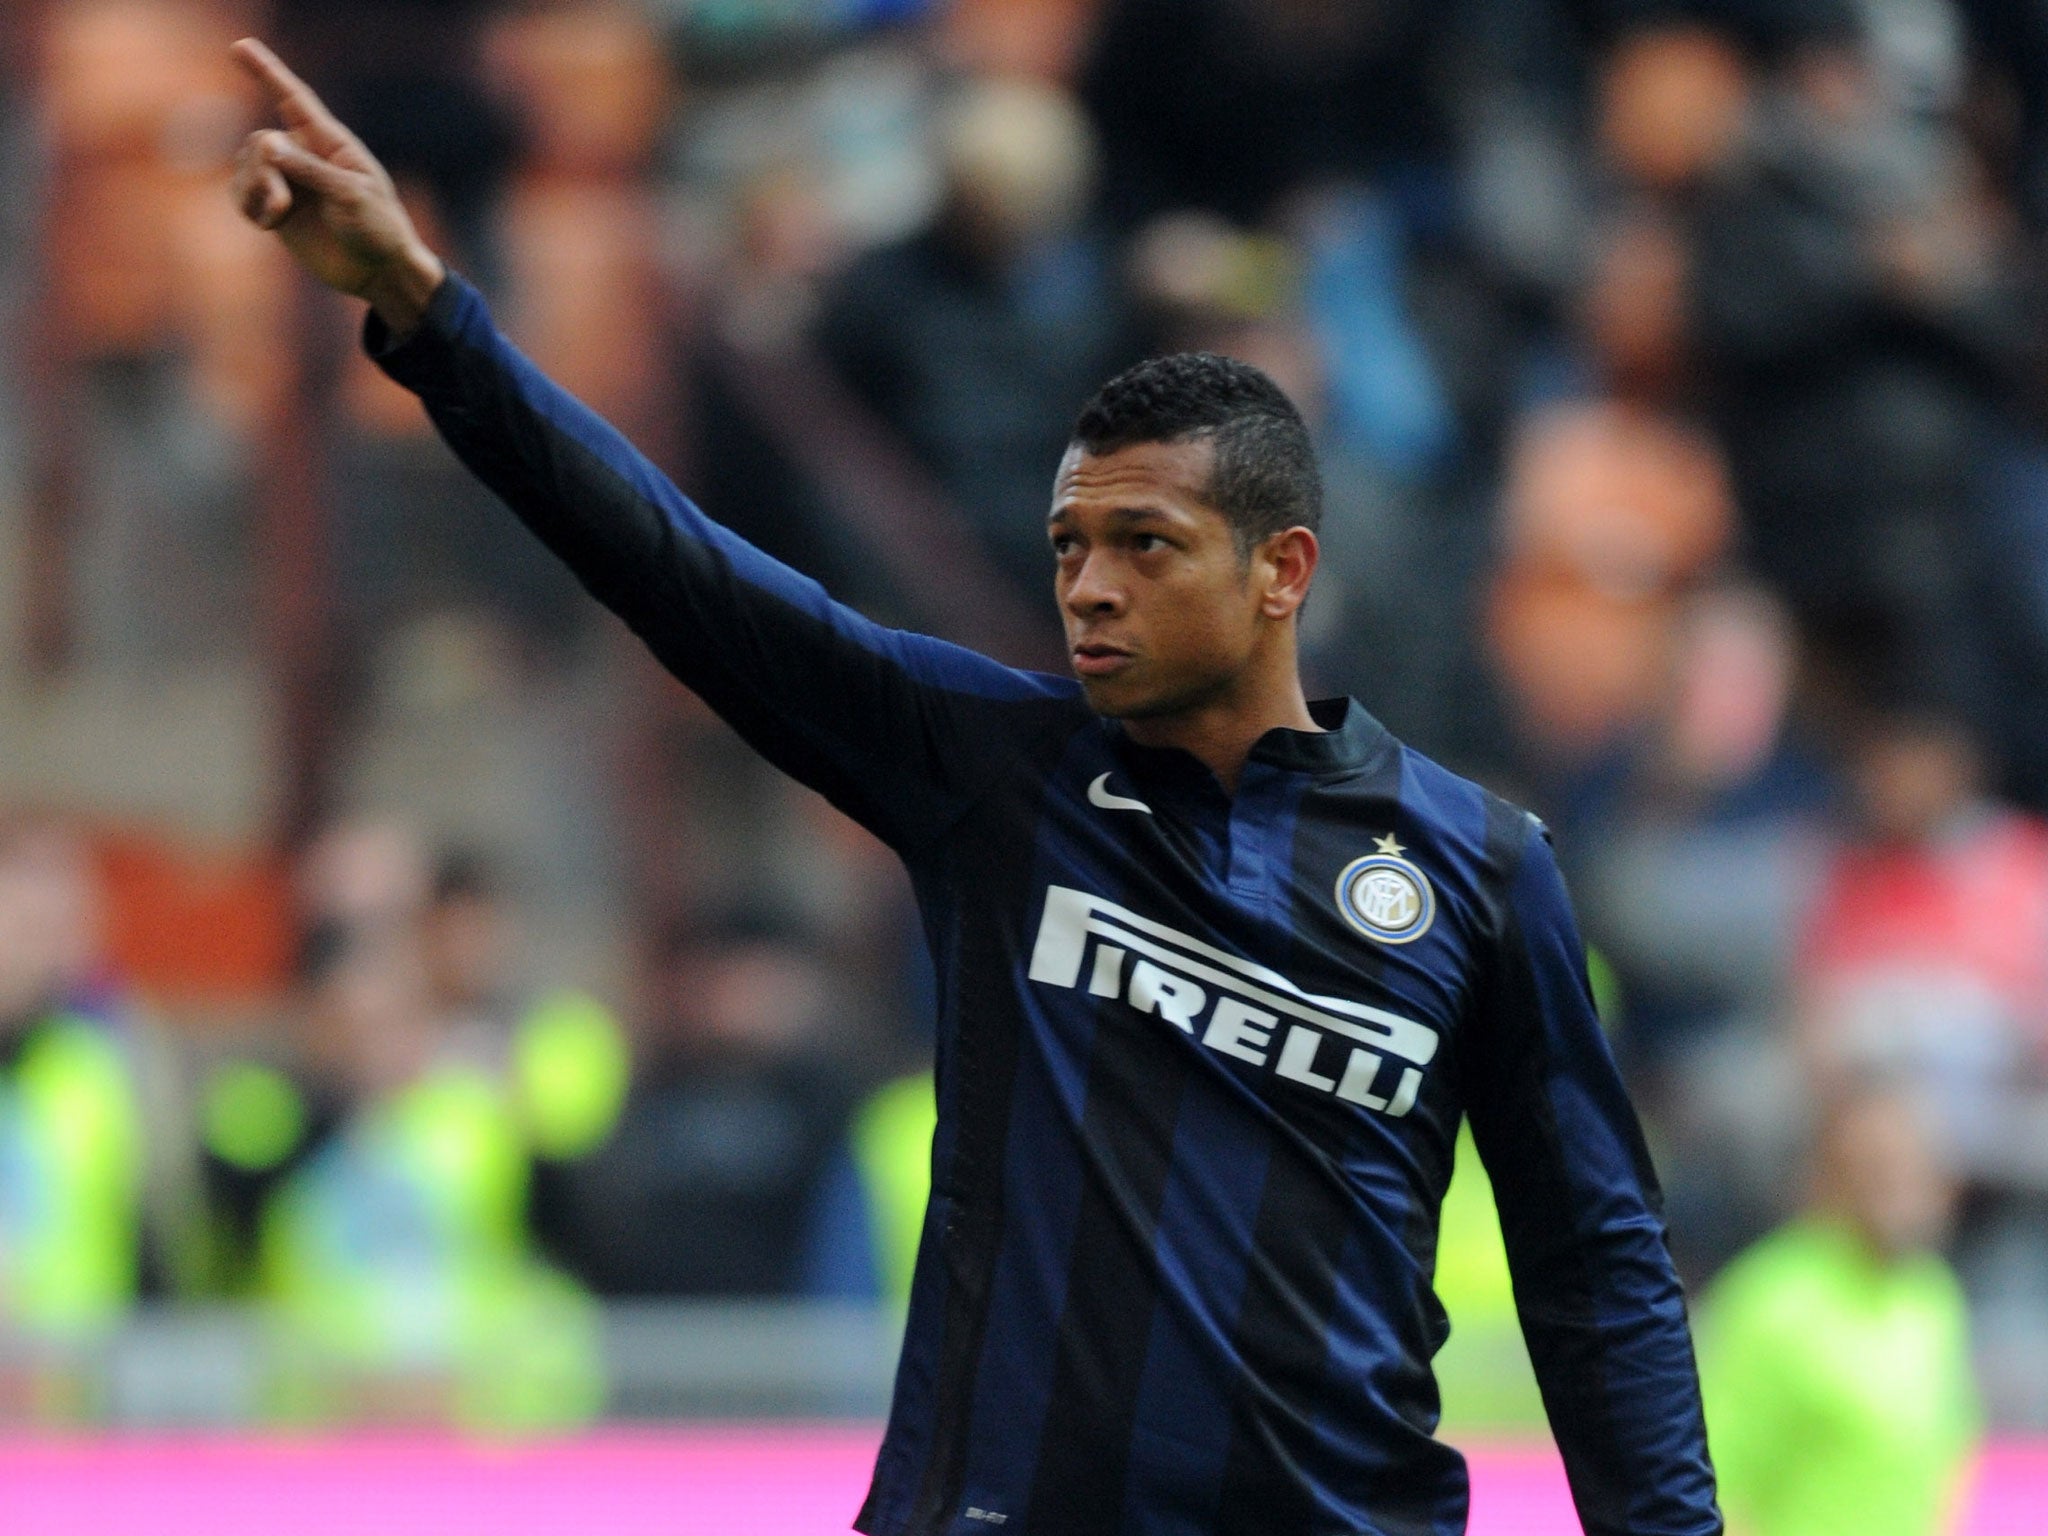 Fredy Guarin has been linked with Chelsea